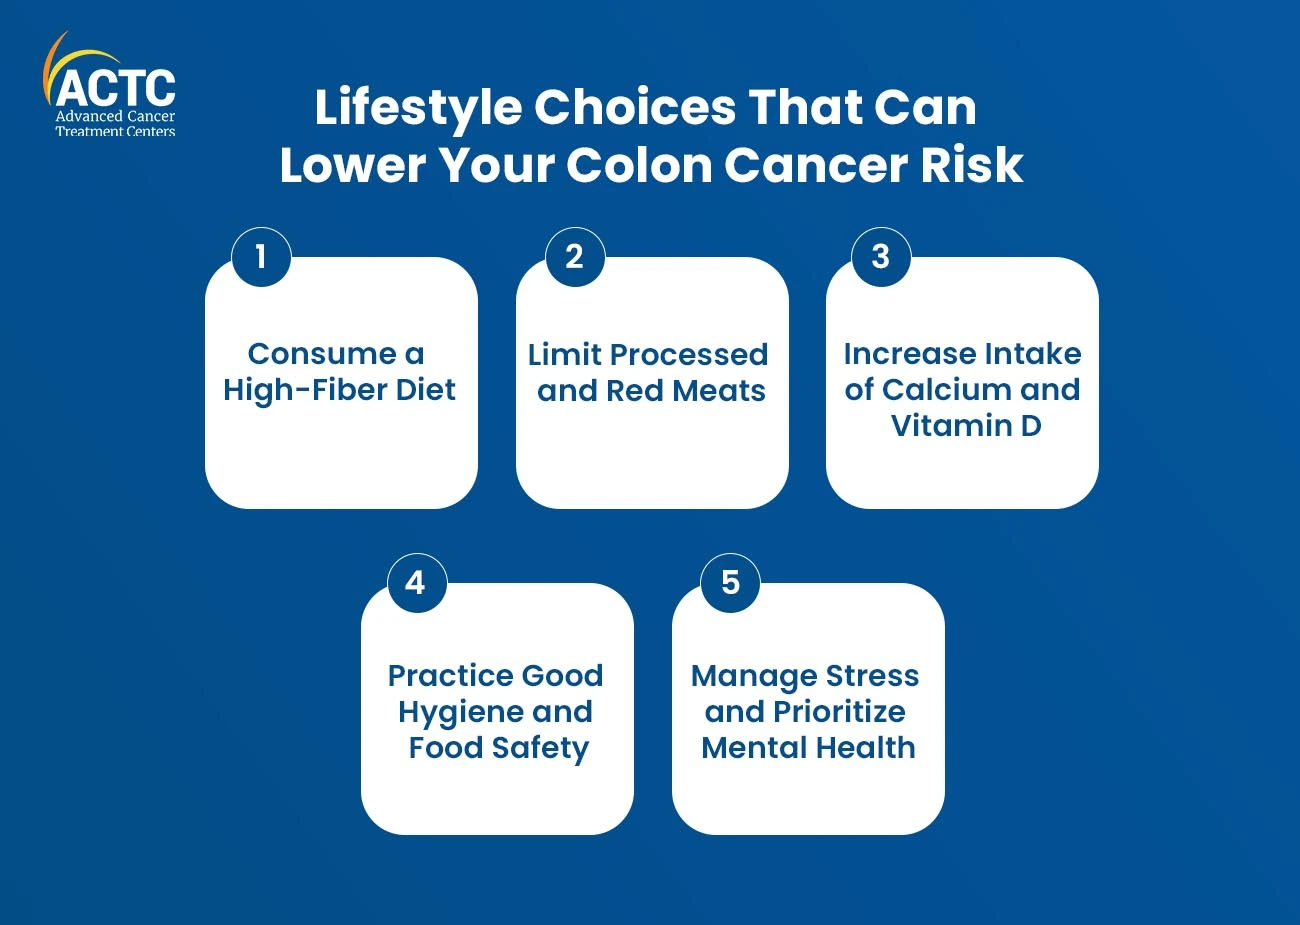 Lifestyle Choices That Can Lower Your Colon Cancer Risk